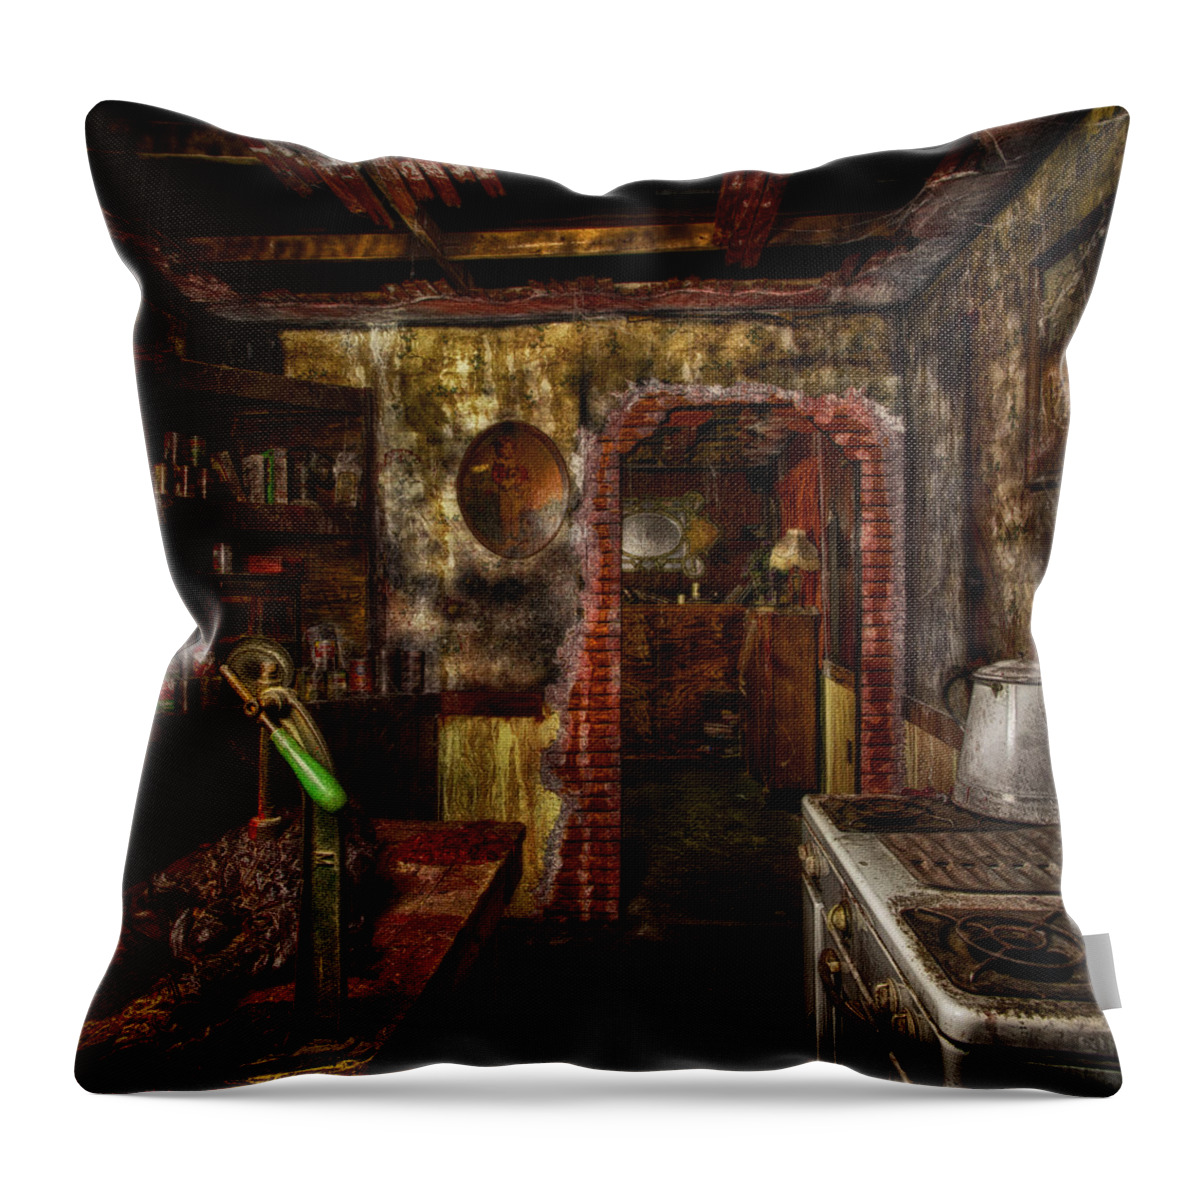 Kitchen Throw Pillow featuring the photograph Haunted Kitchen by Daniel George